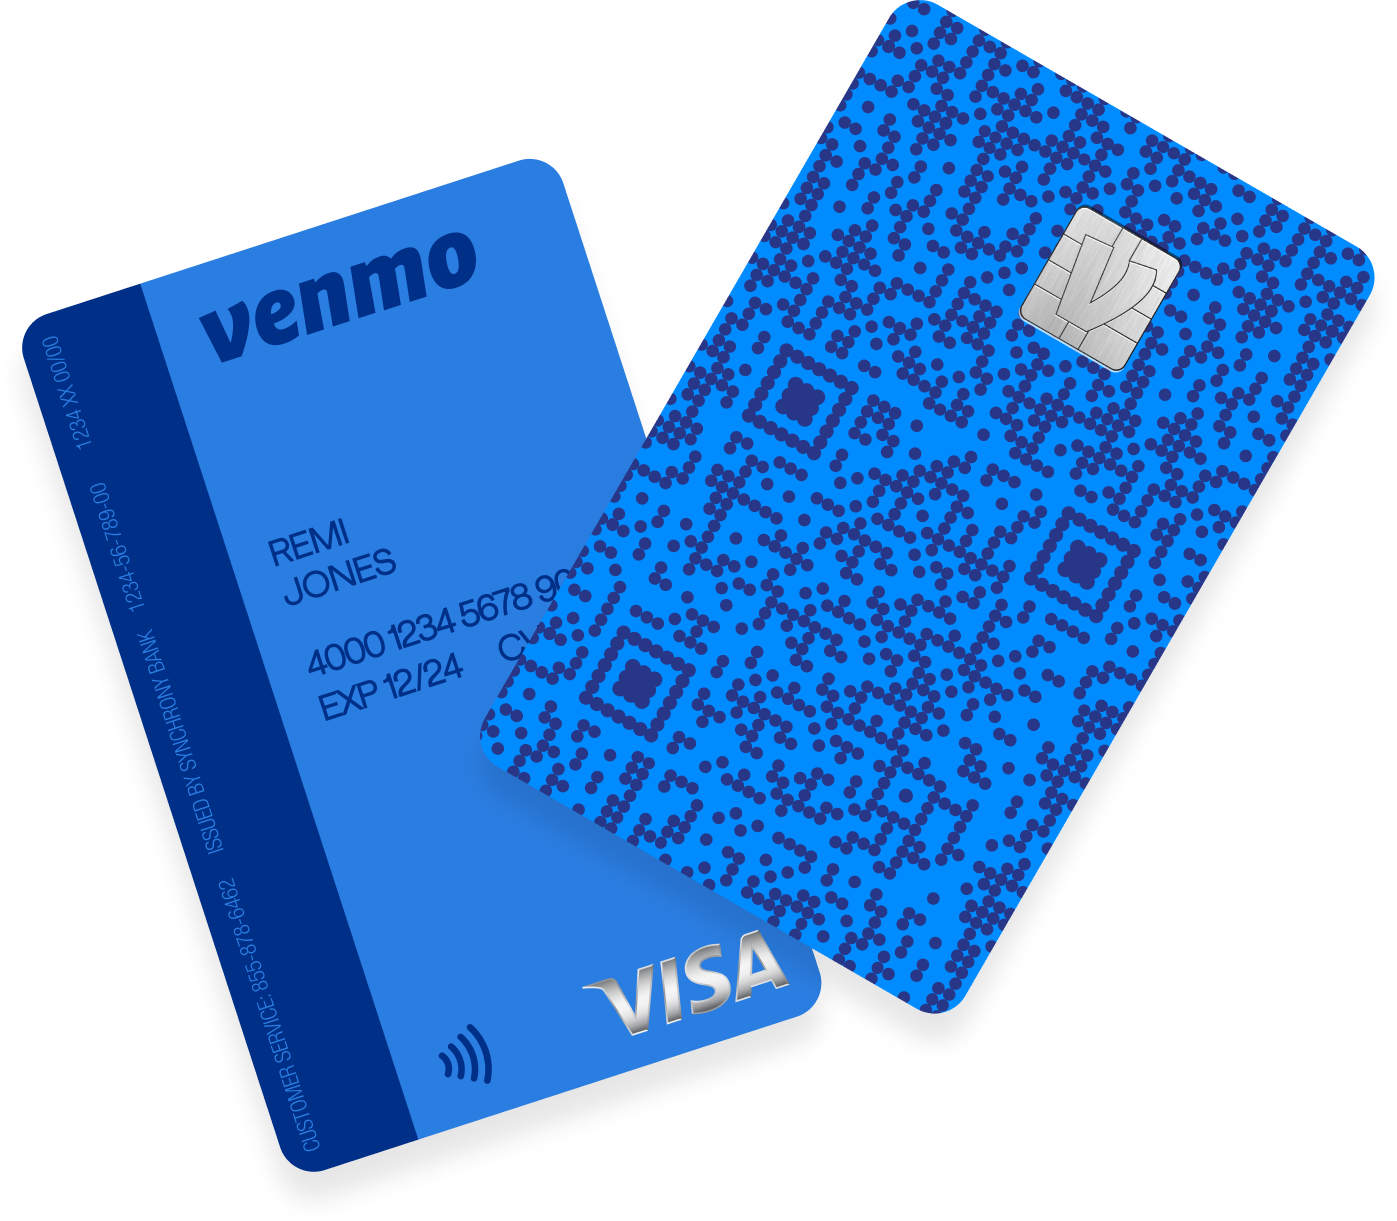 venmo card for buying crypto